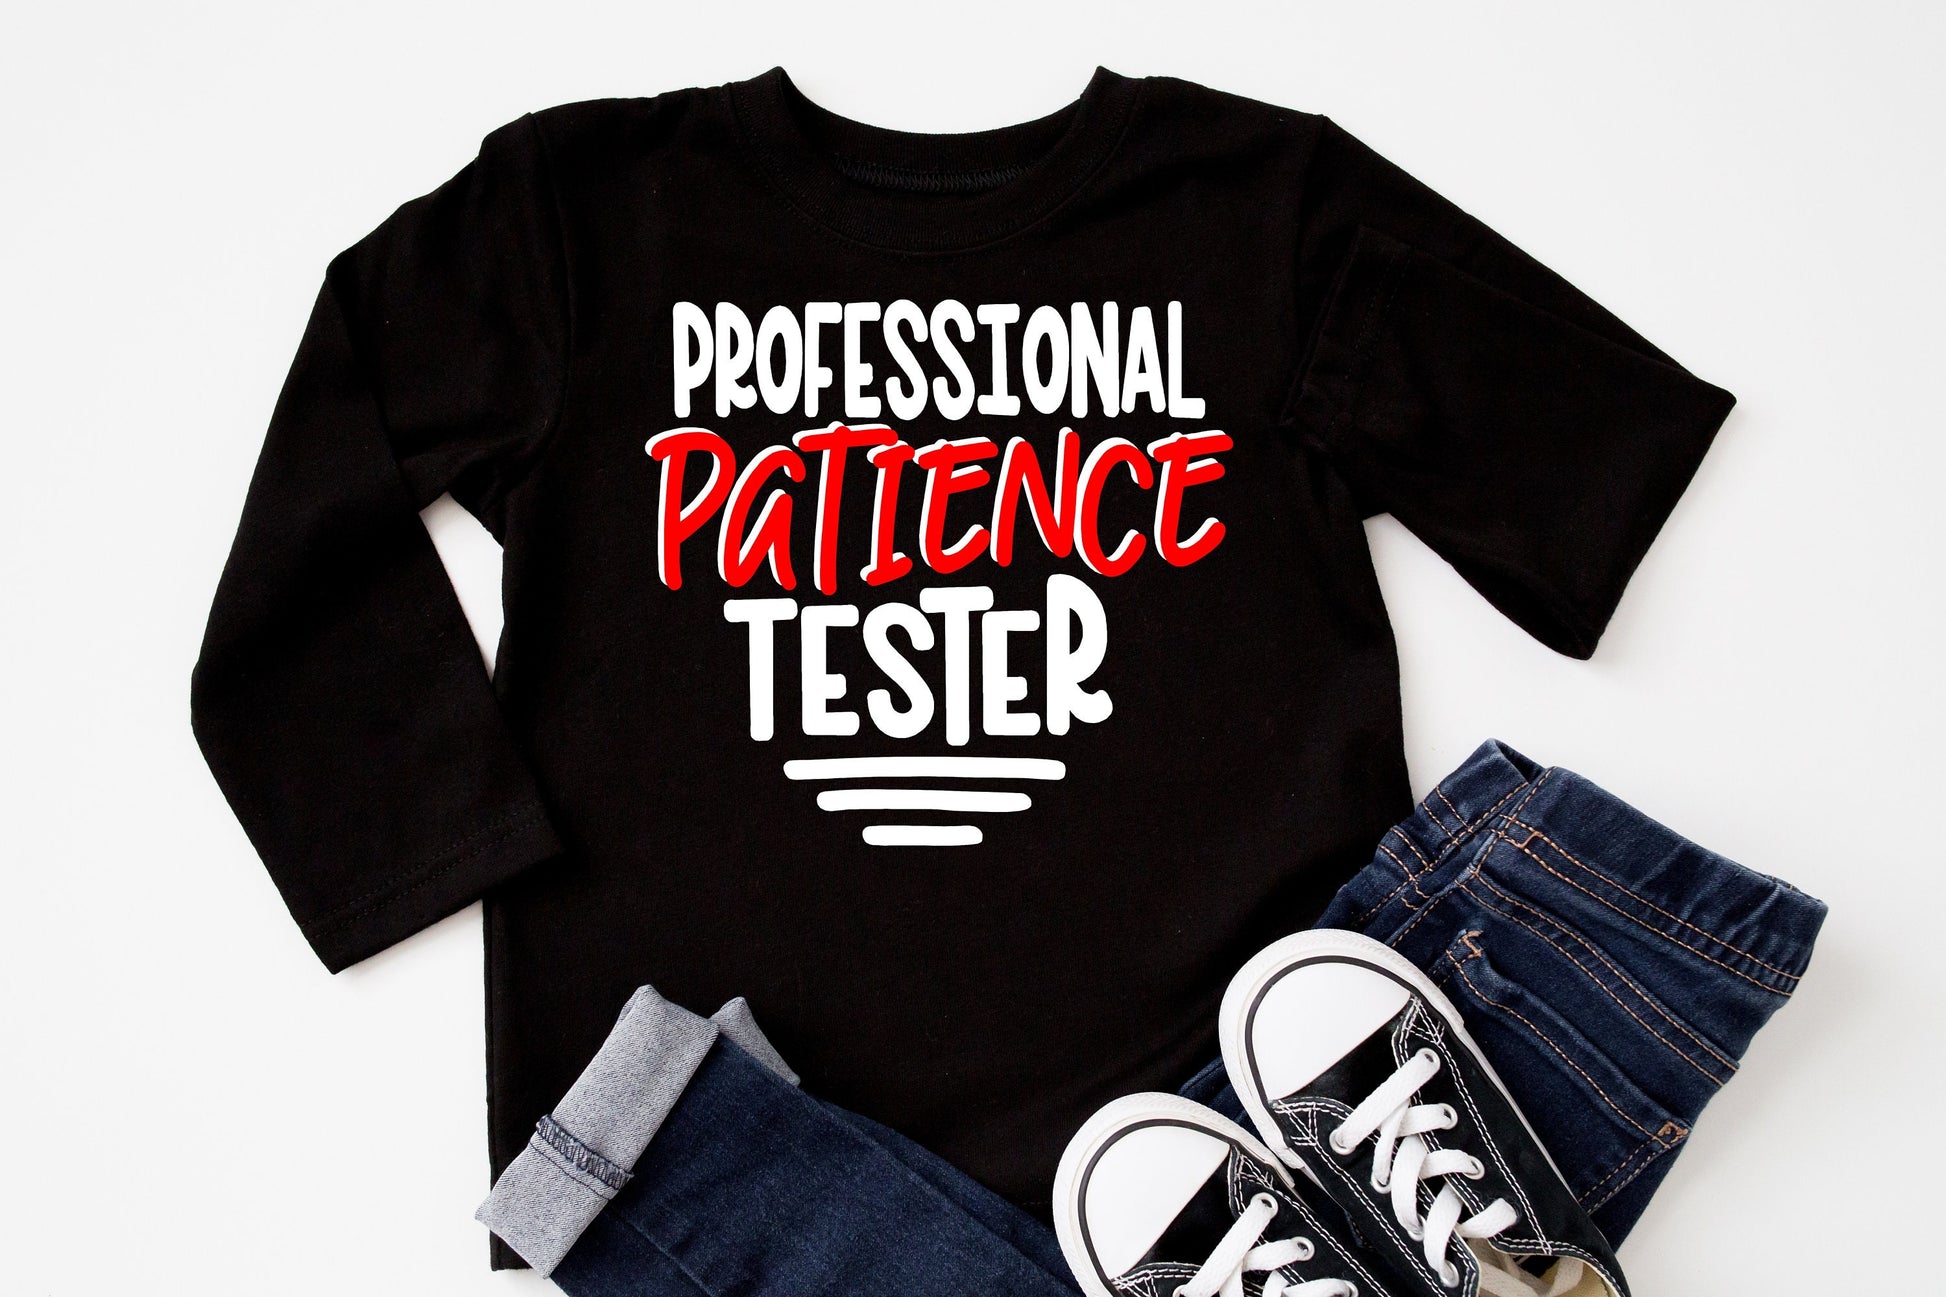 Professional Patience Tester Infant, Toddler or Kids Shirt or Bodysuit - Cute Toddler Shirt - toddler boy shirt - toddler life shirt